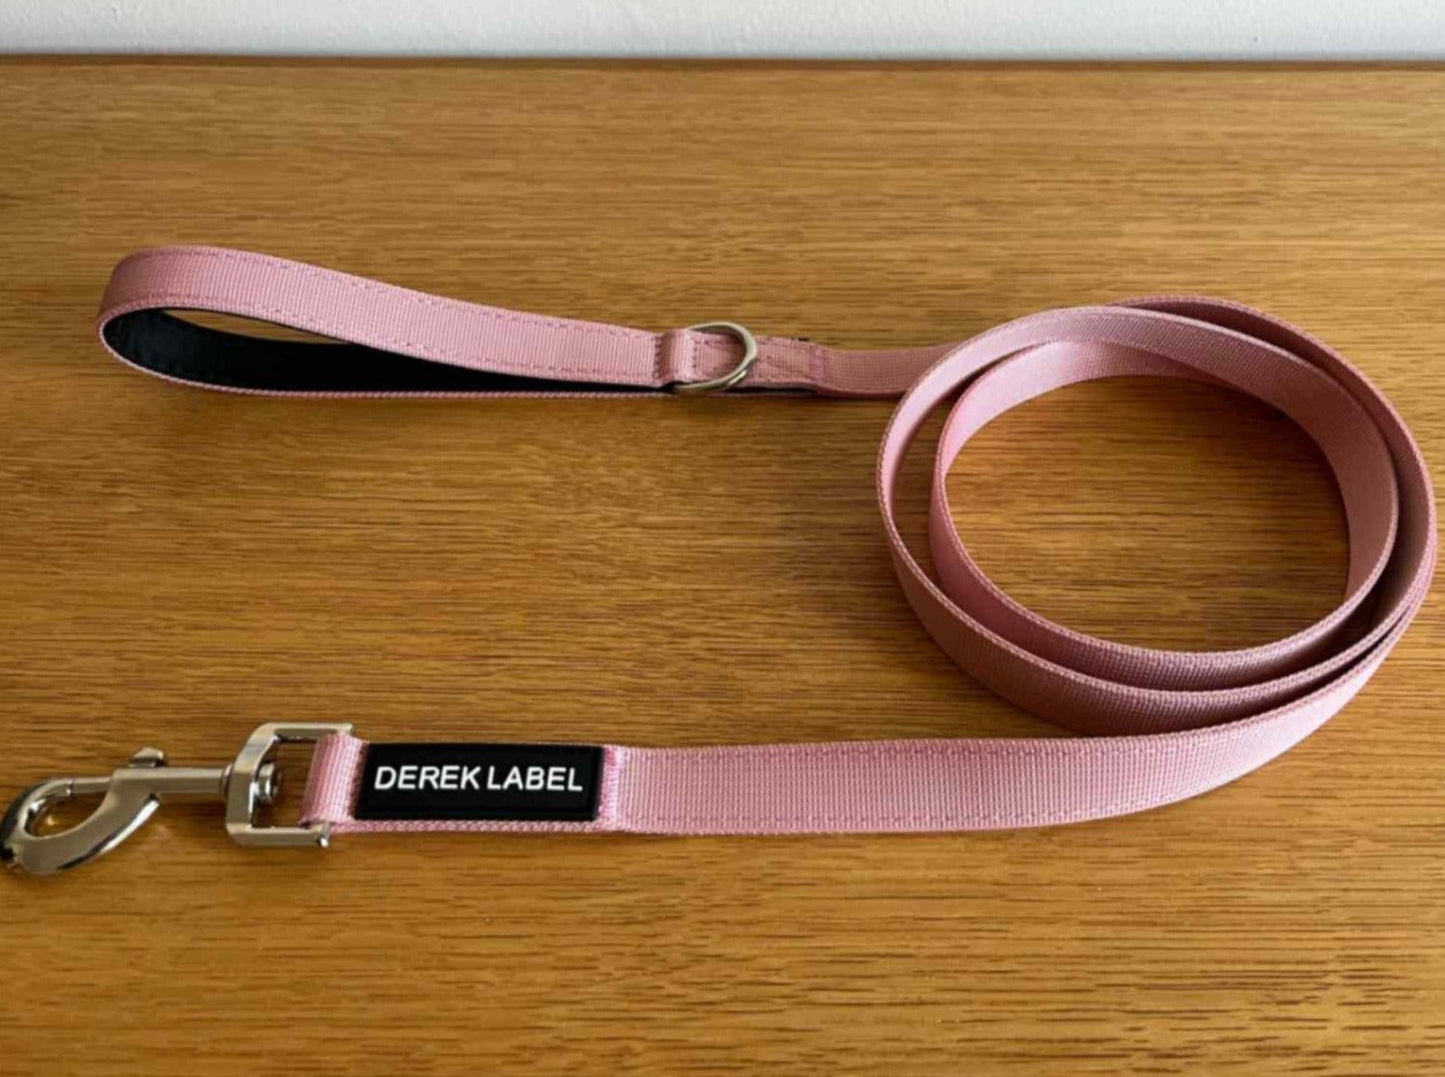 Rose Pink colored leash